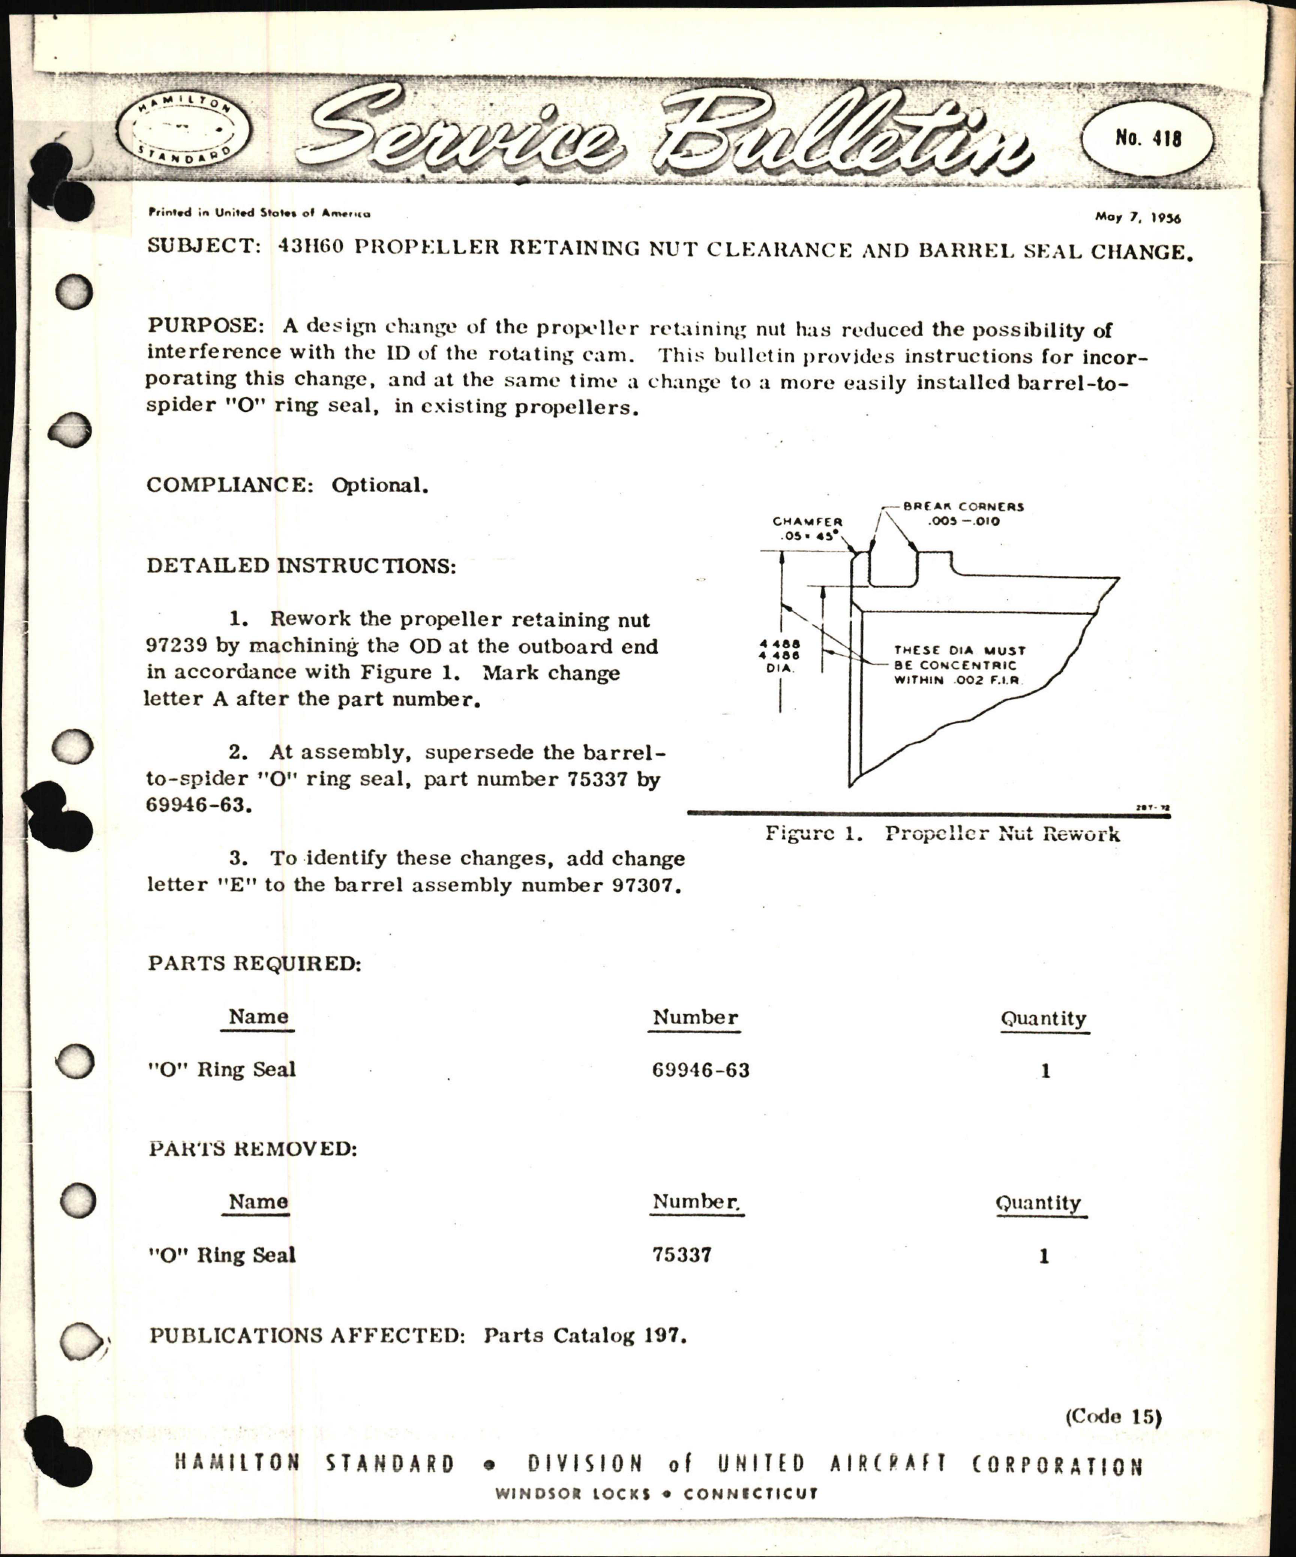 Sample page 1 from AirCorps Library document: 43H60 Propeller Retaining Nut Clearance and Barrel Seal Change